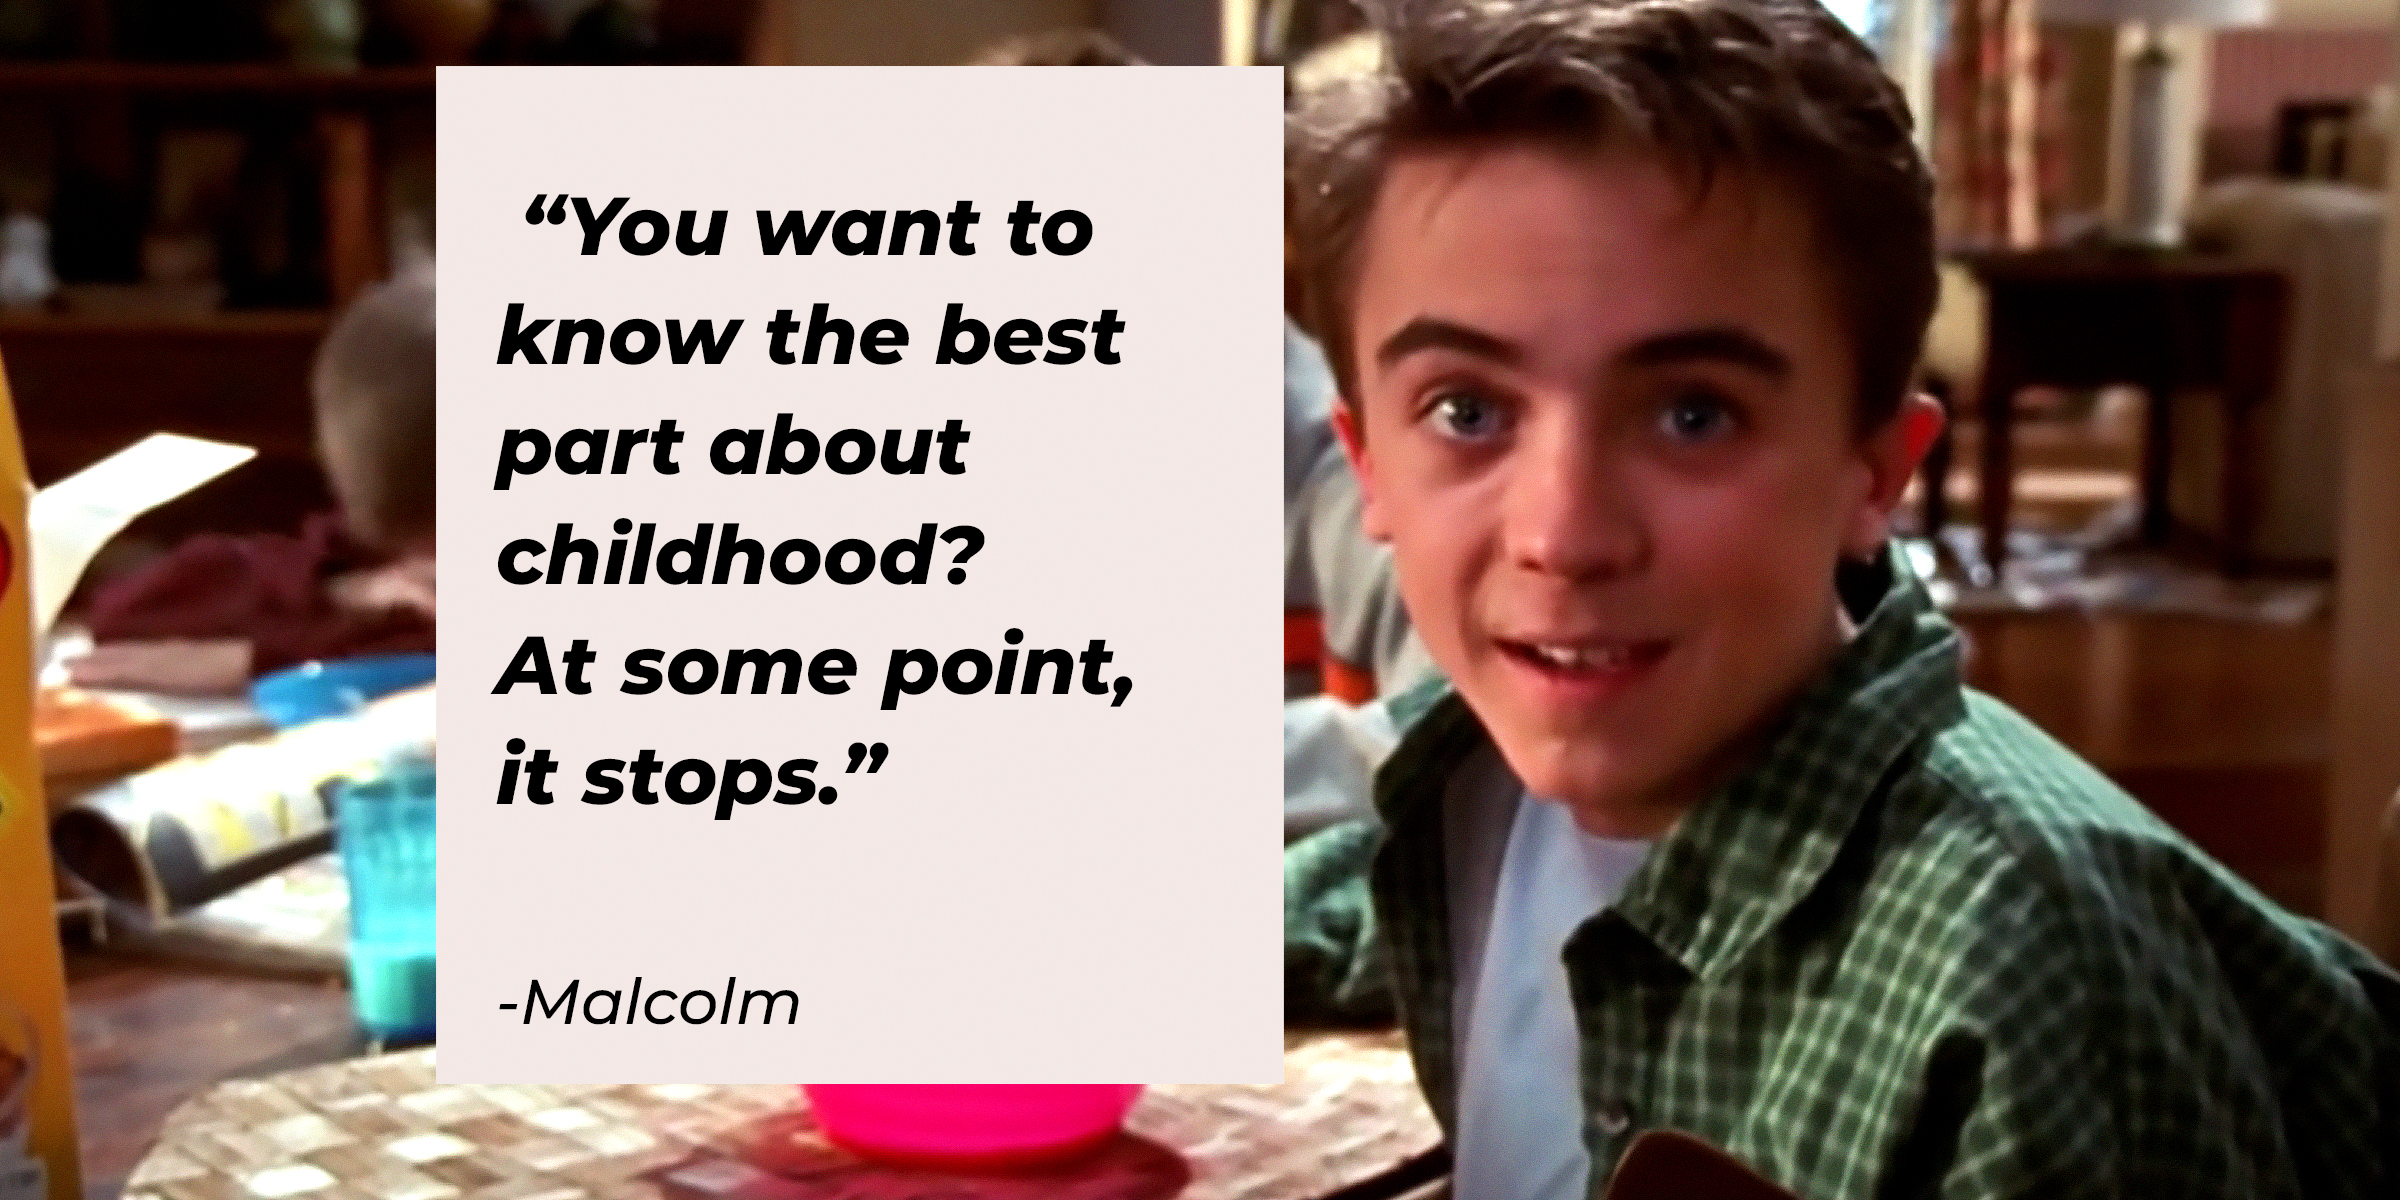 Malcom from "Malcolm in the Middle" with his quote: “You want to know the best part about childhood? At some point, it stops.” | Source: YouTube.com/Channel4